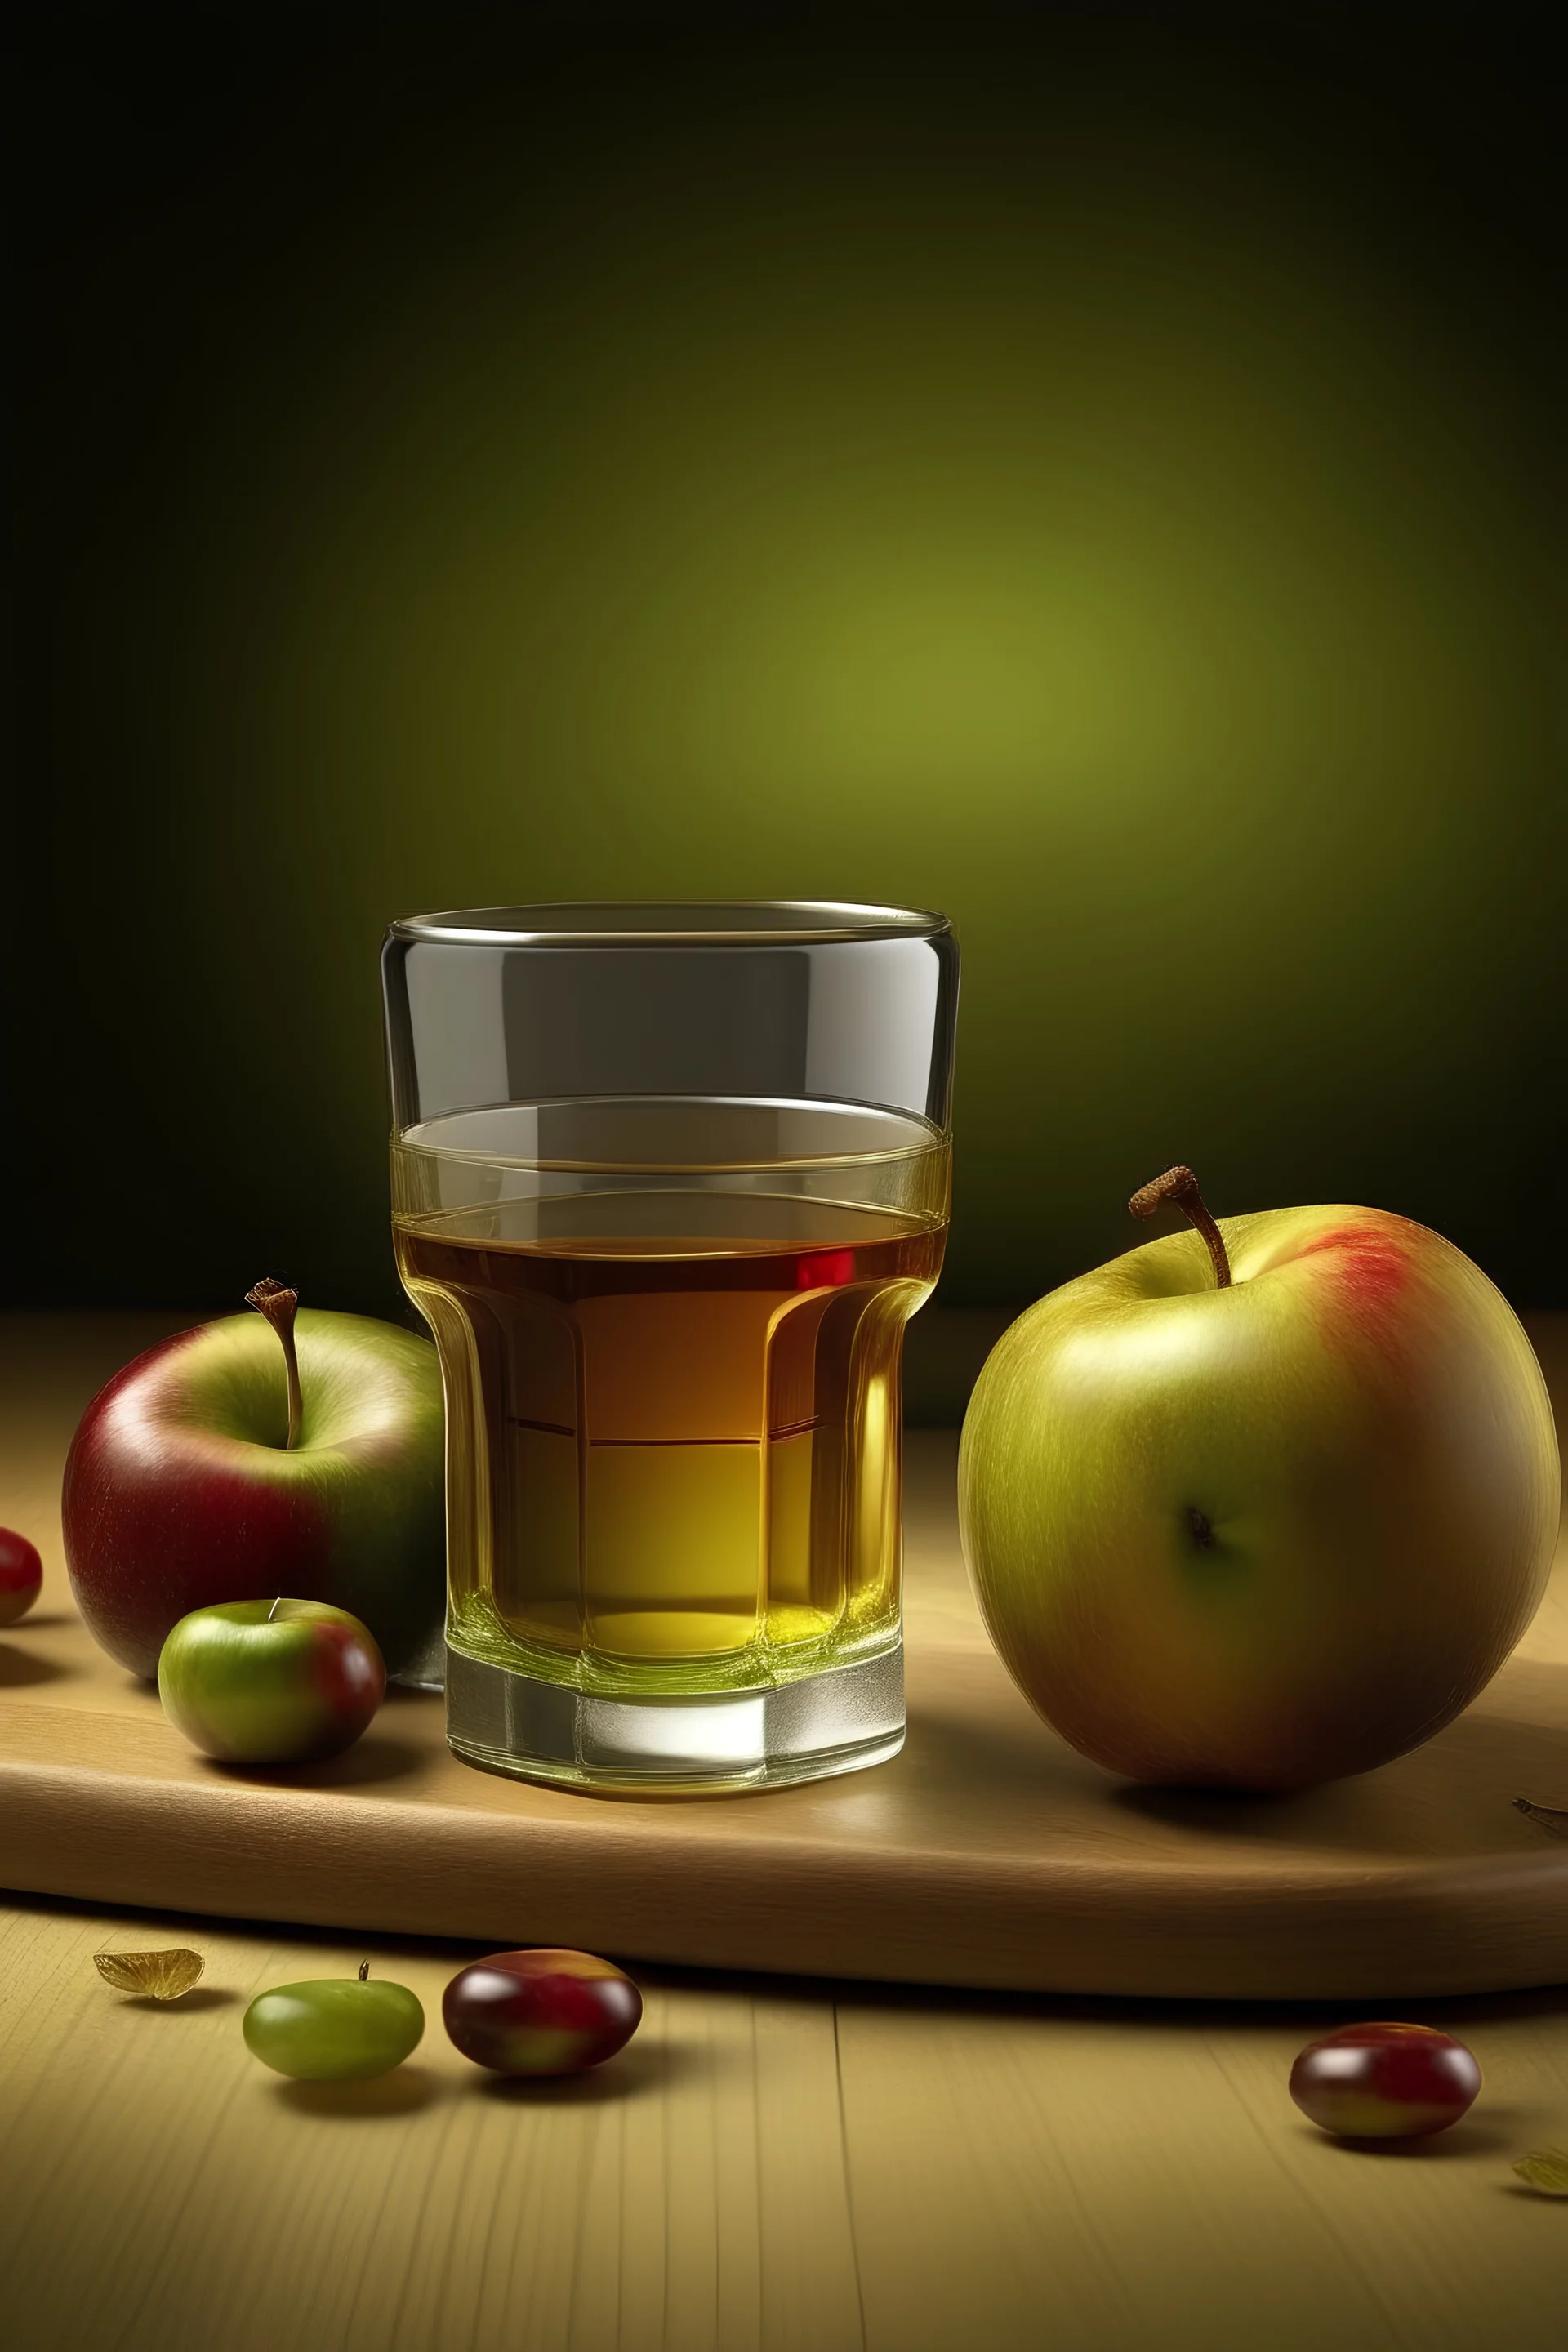 "Craft an image featuring a balanced composition of elements like apples, vinegar, and a shot glass, showcasing the precise and measured approach towards achieving mental stability through an Apple Cider Vinegar Shot."